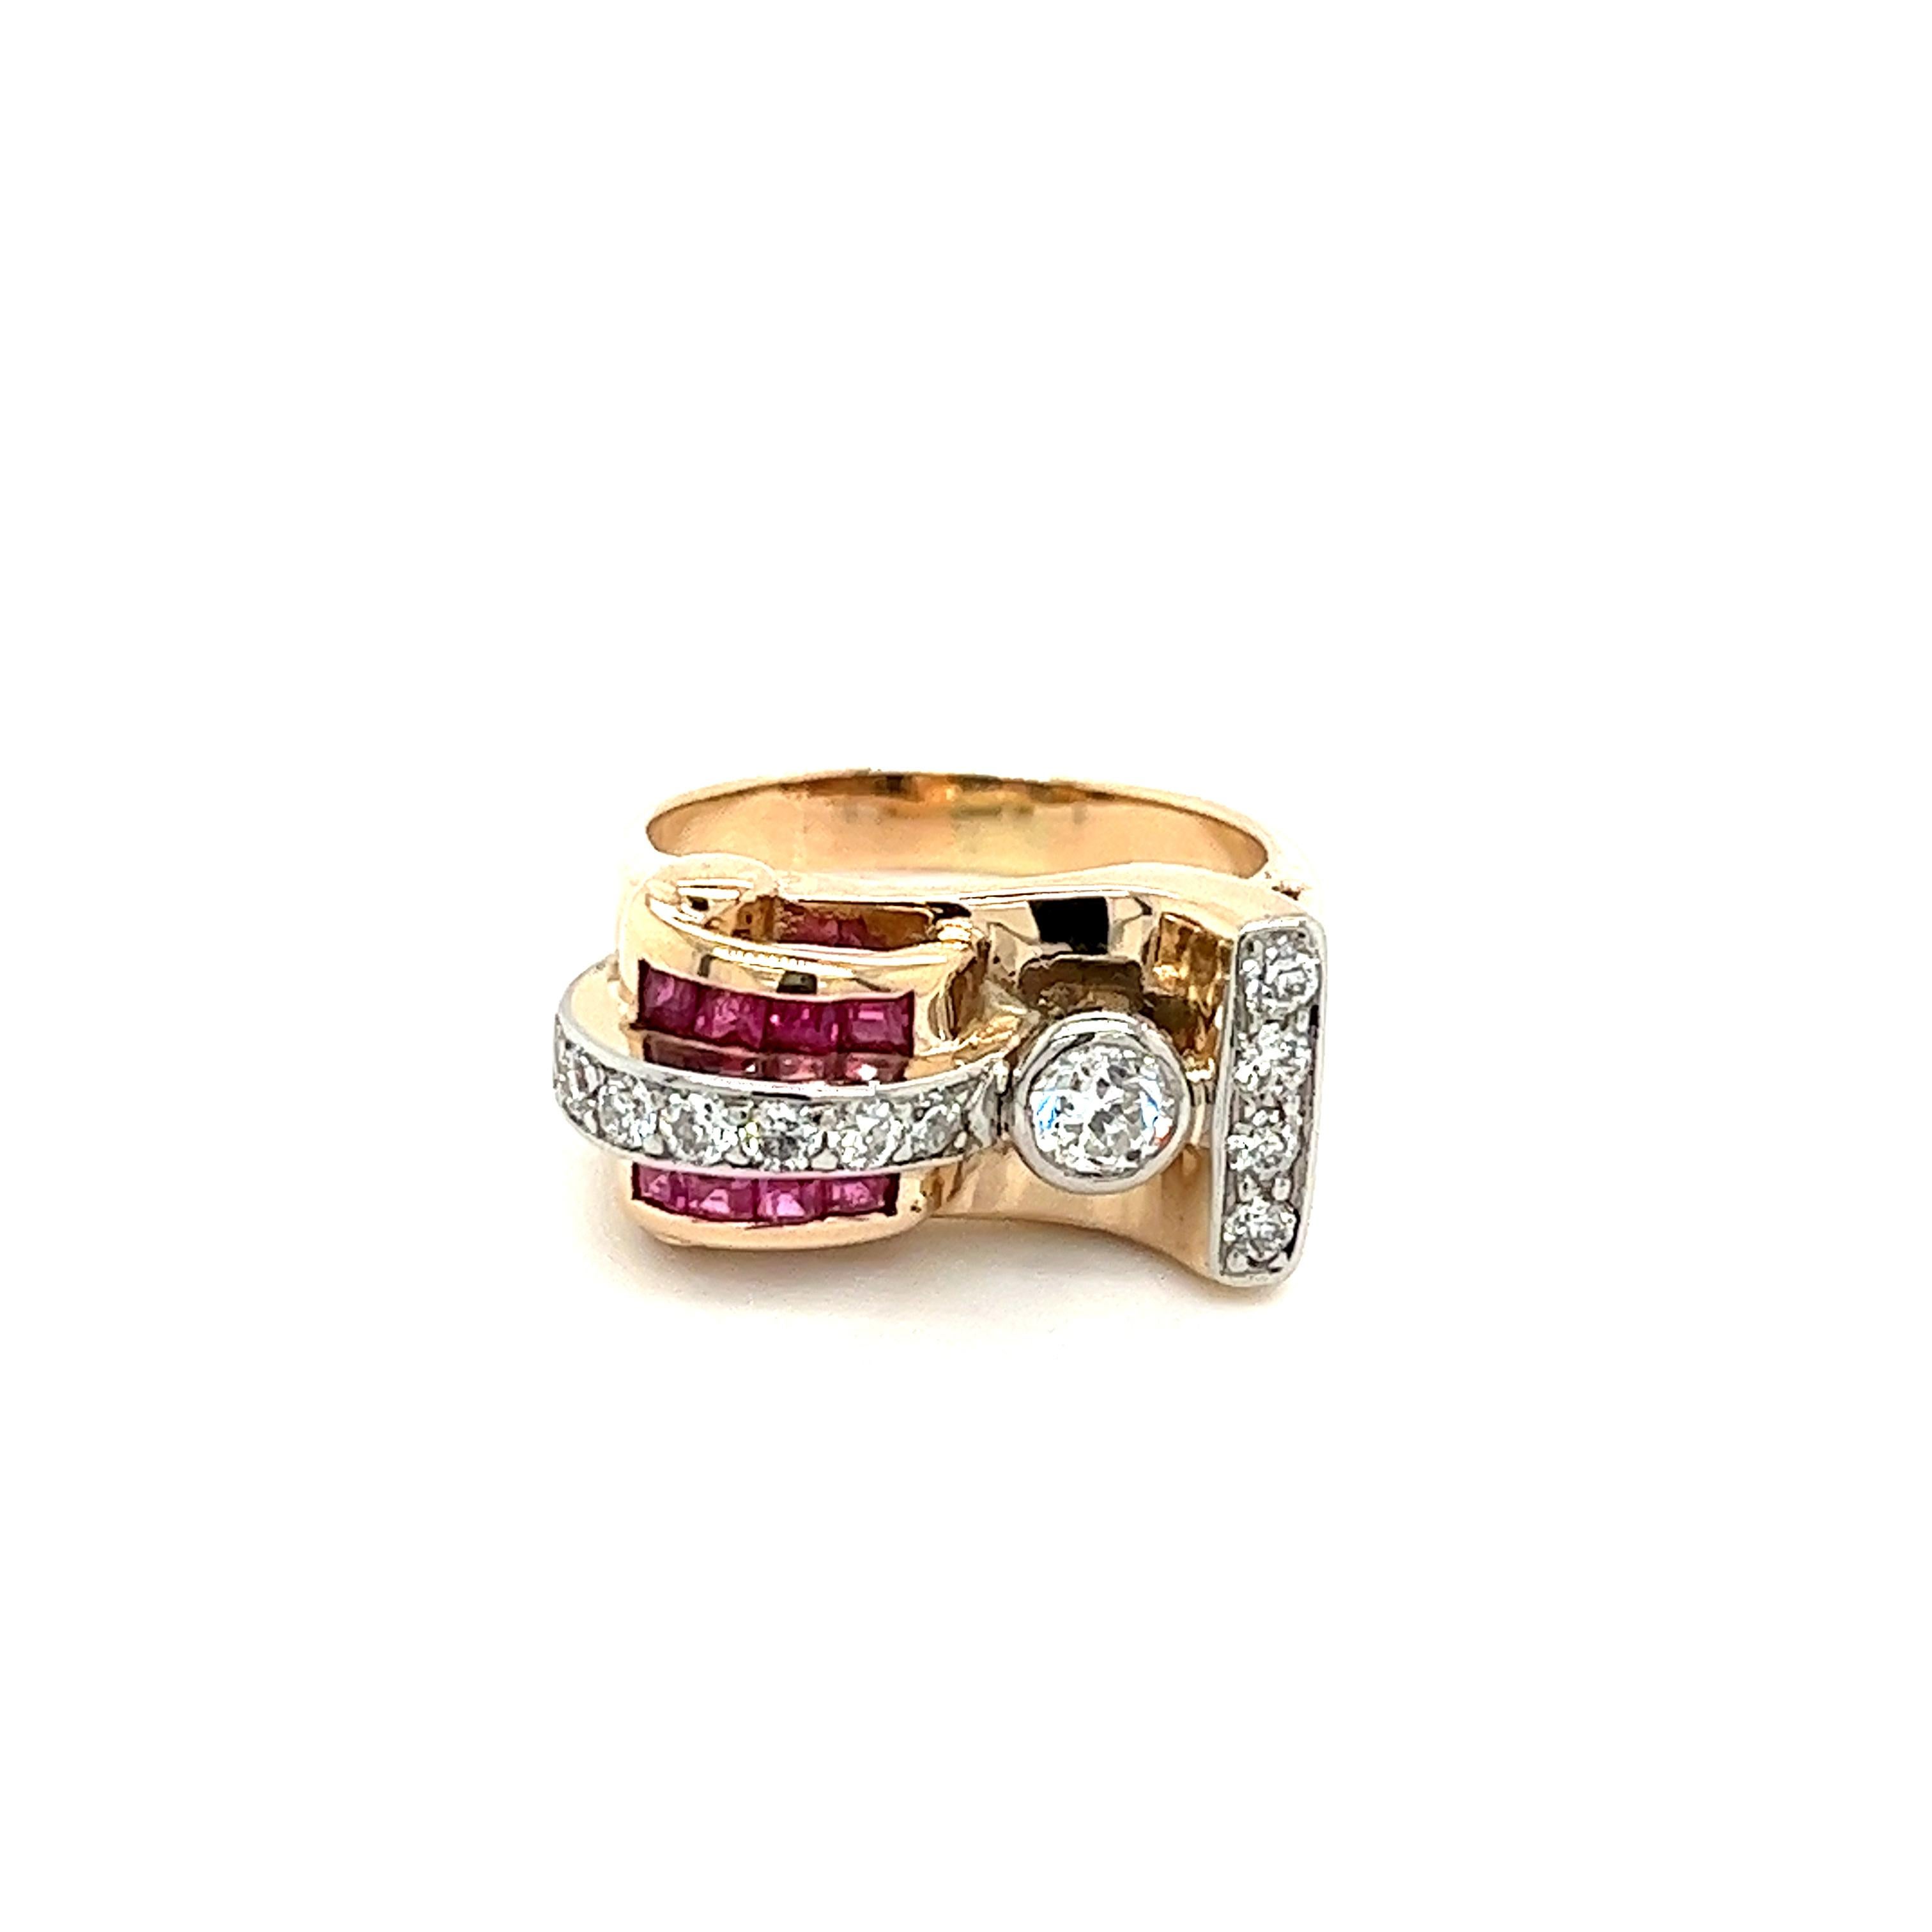 Vintage 14k Gold Retro Style Old Euro Cut Diamond and Baguette Cut Ruby Ring For Sale 3